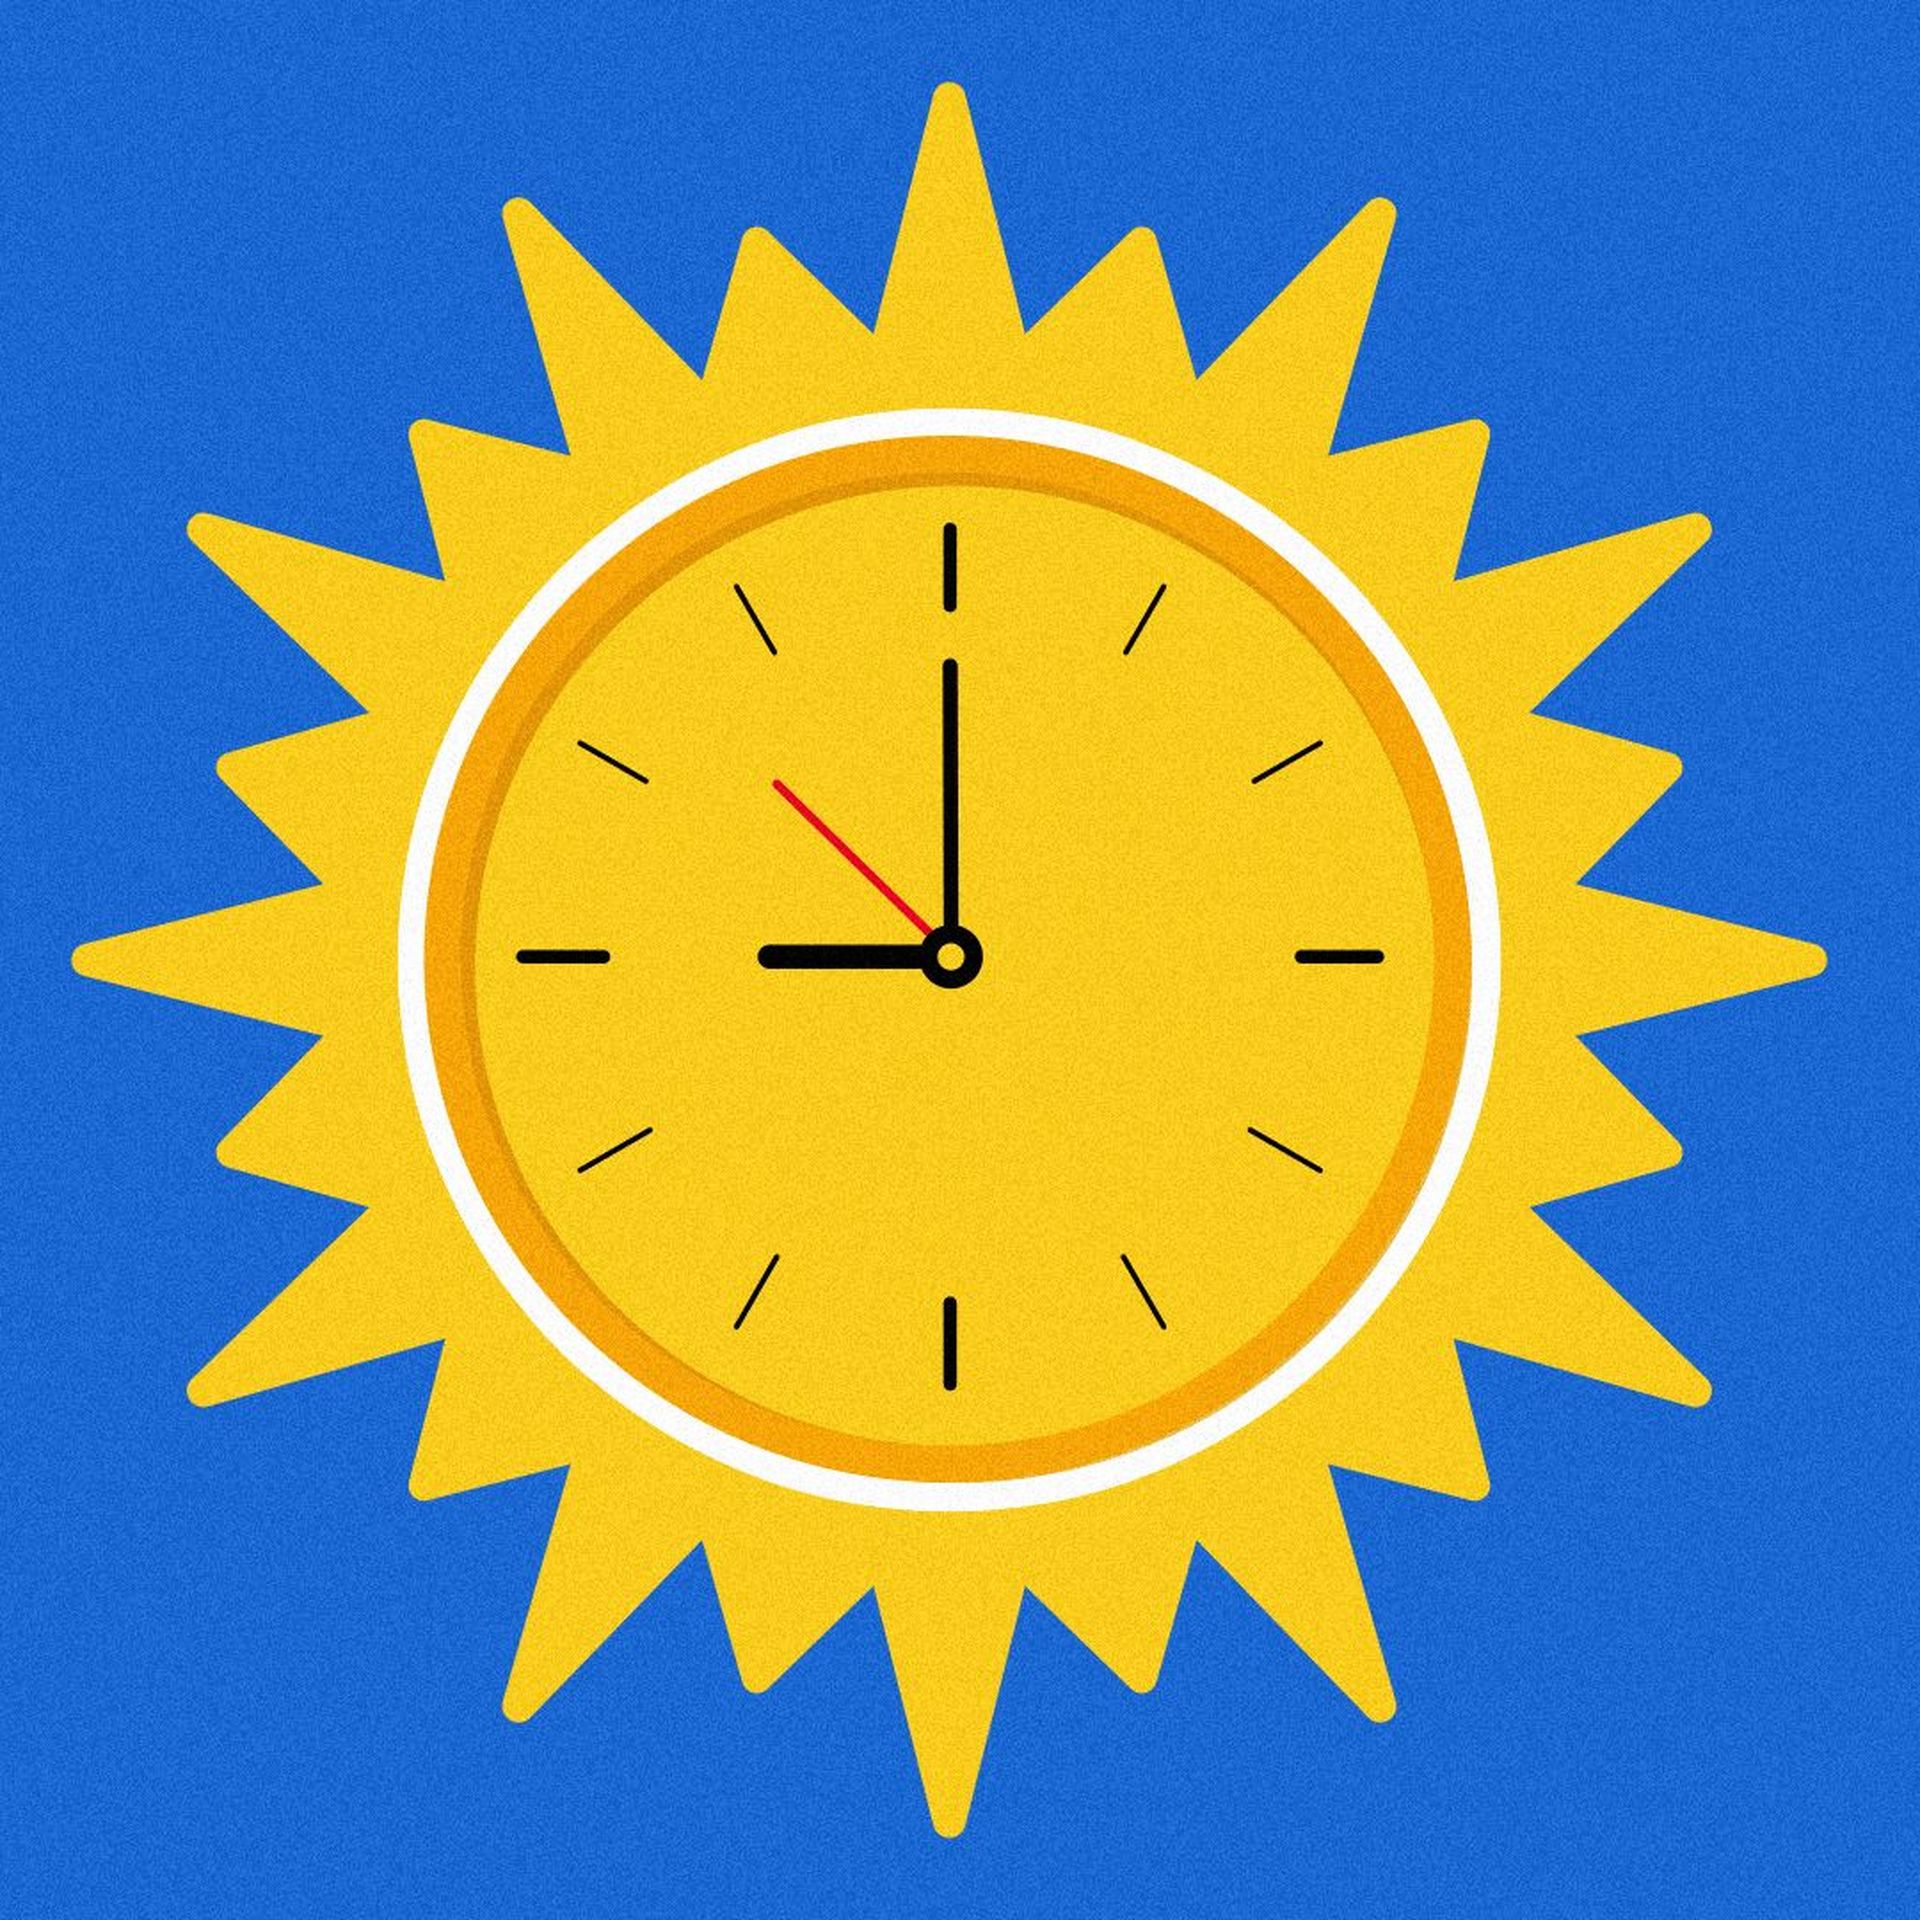 Learn when daylight saving time ends in 2023 and why we use it